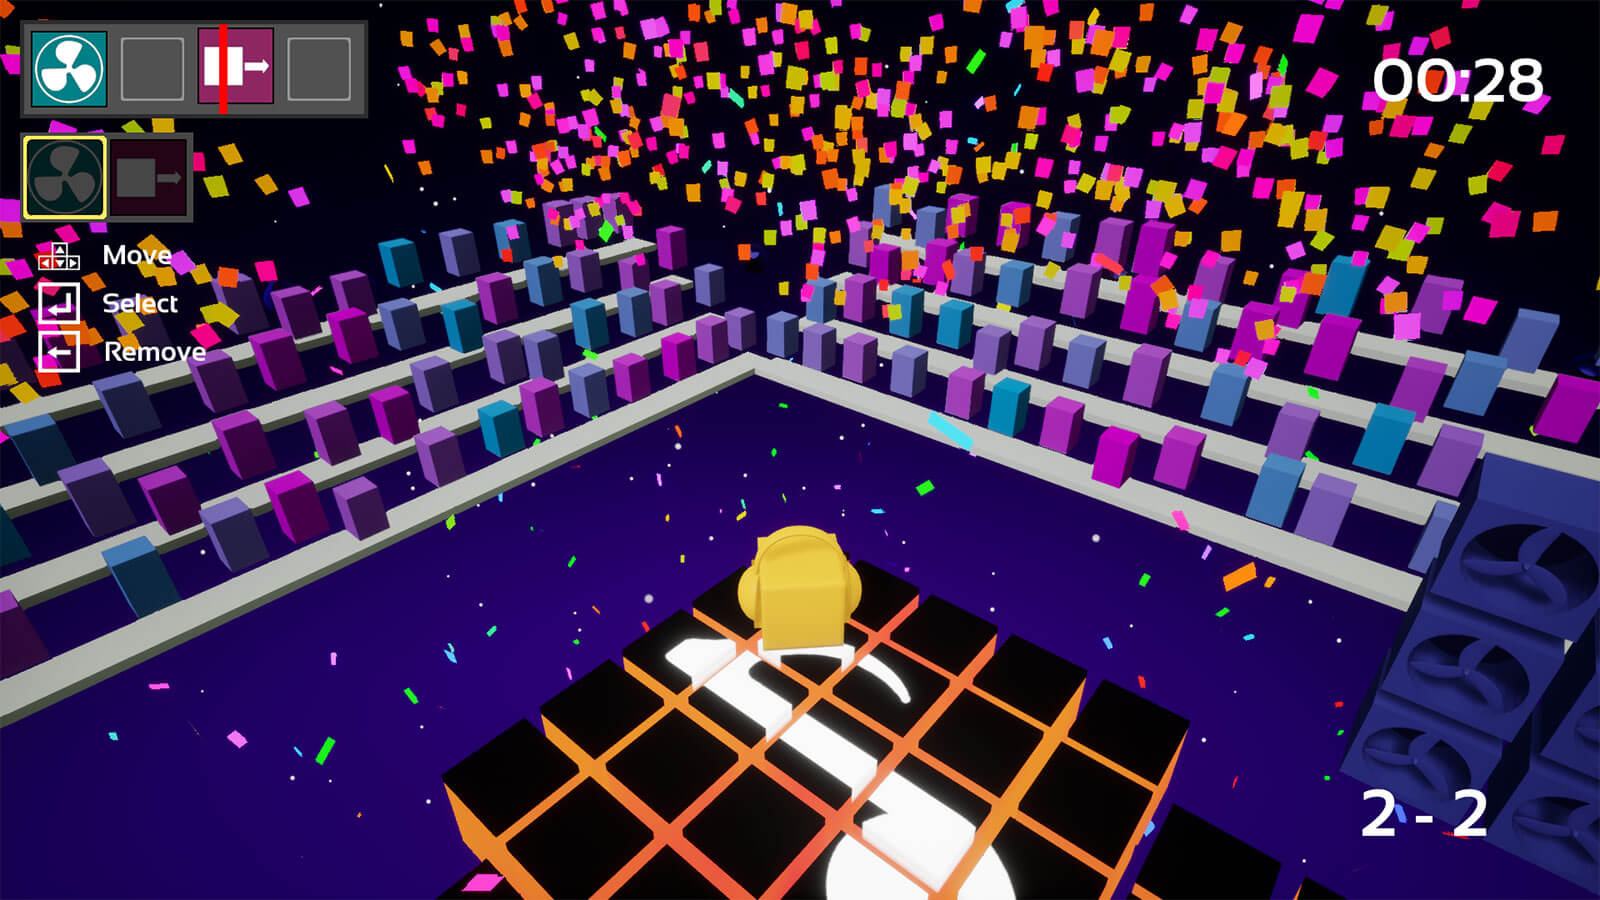 A gold block faces the corner of a platform with various pastel colored blocks and confetti in the background